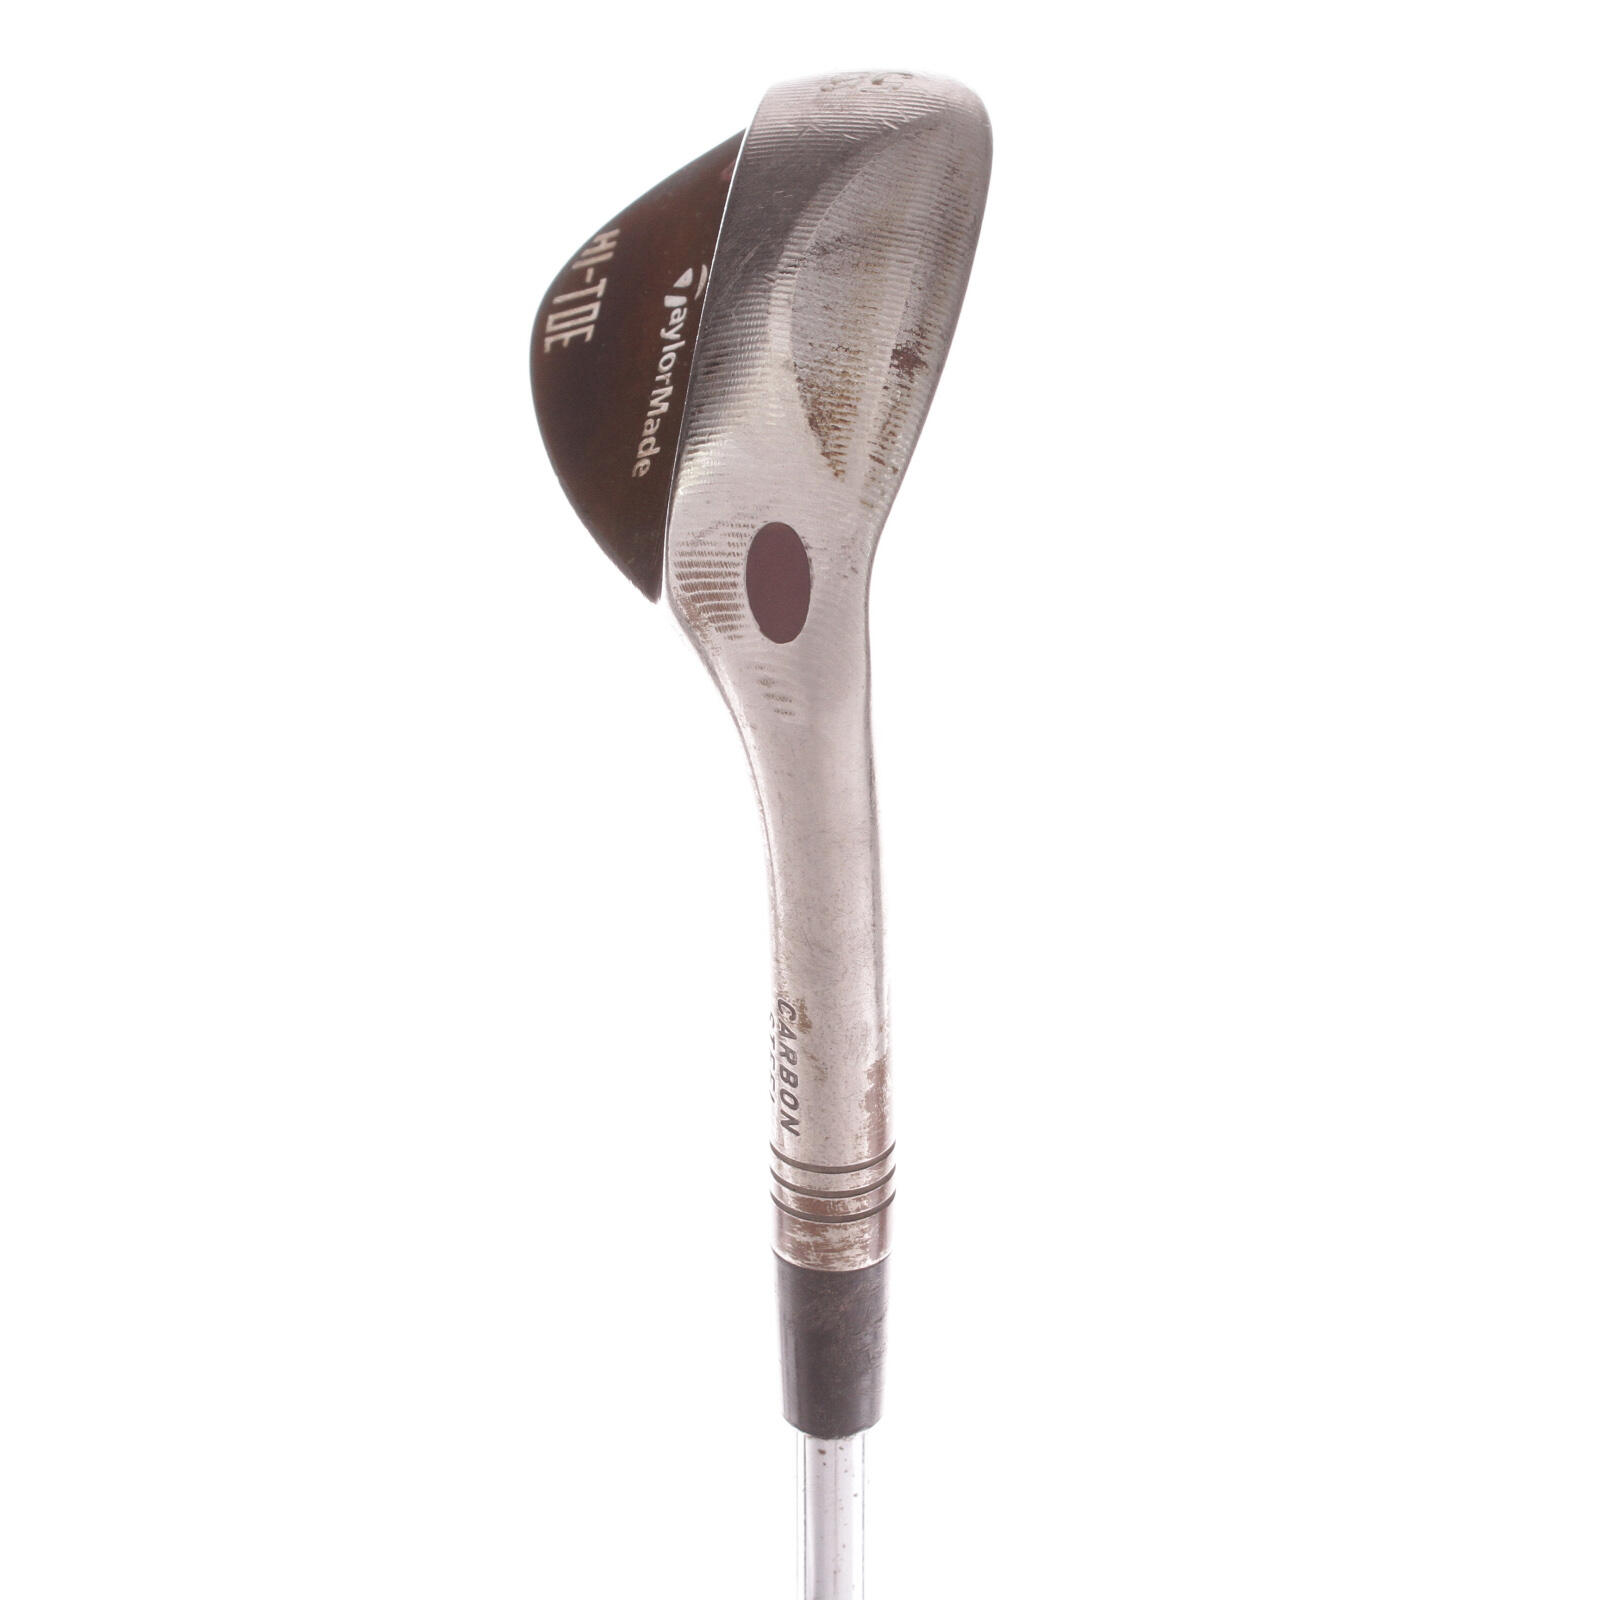 USED - Lob Wedge TaylorMade Hi-Toe 58 Degree Steel Shaft Right Handed - GRADE D 3/5